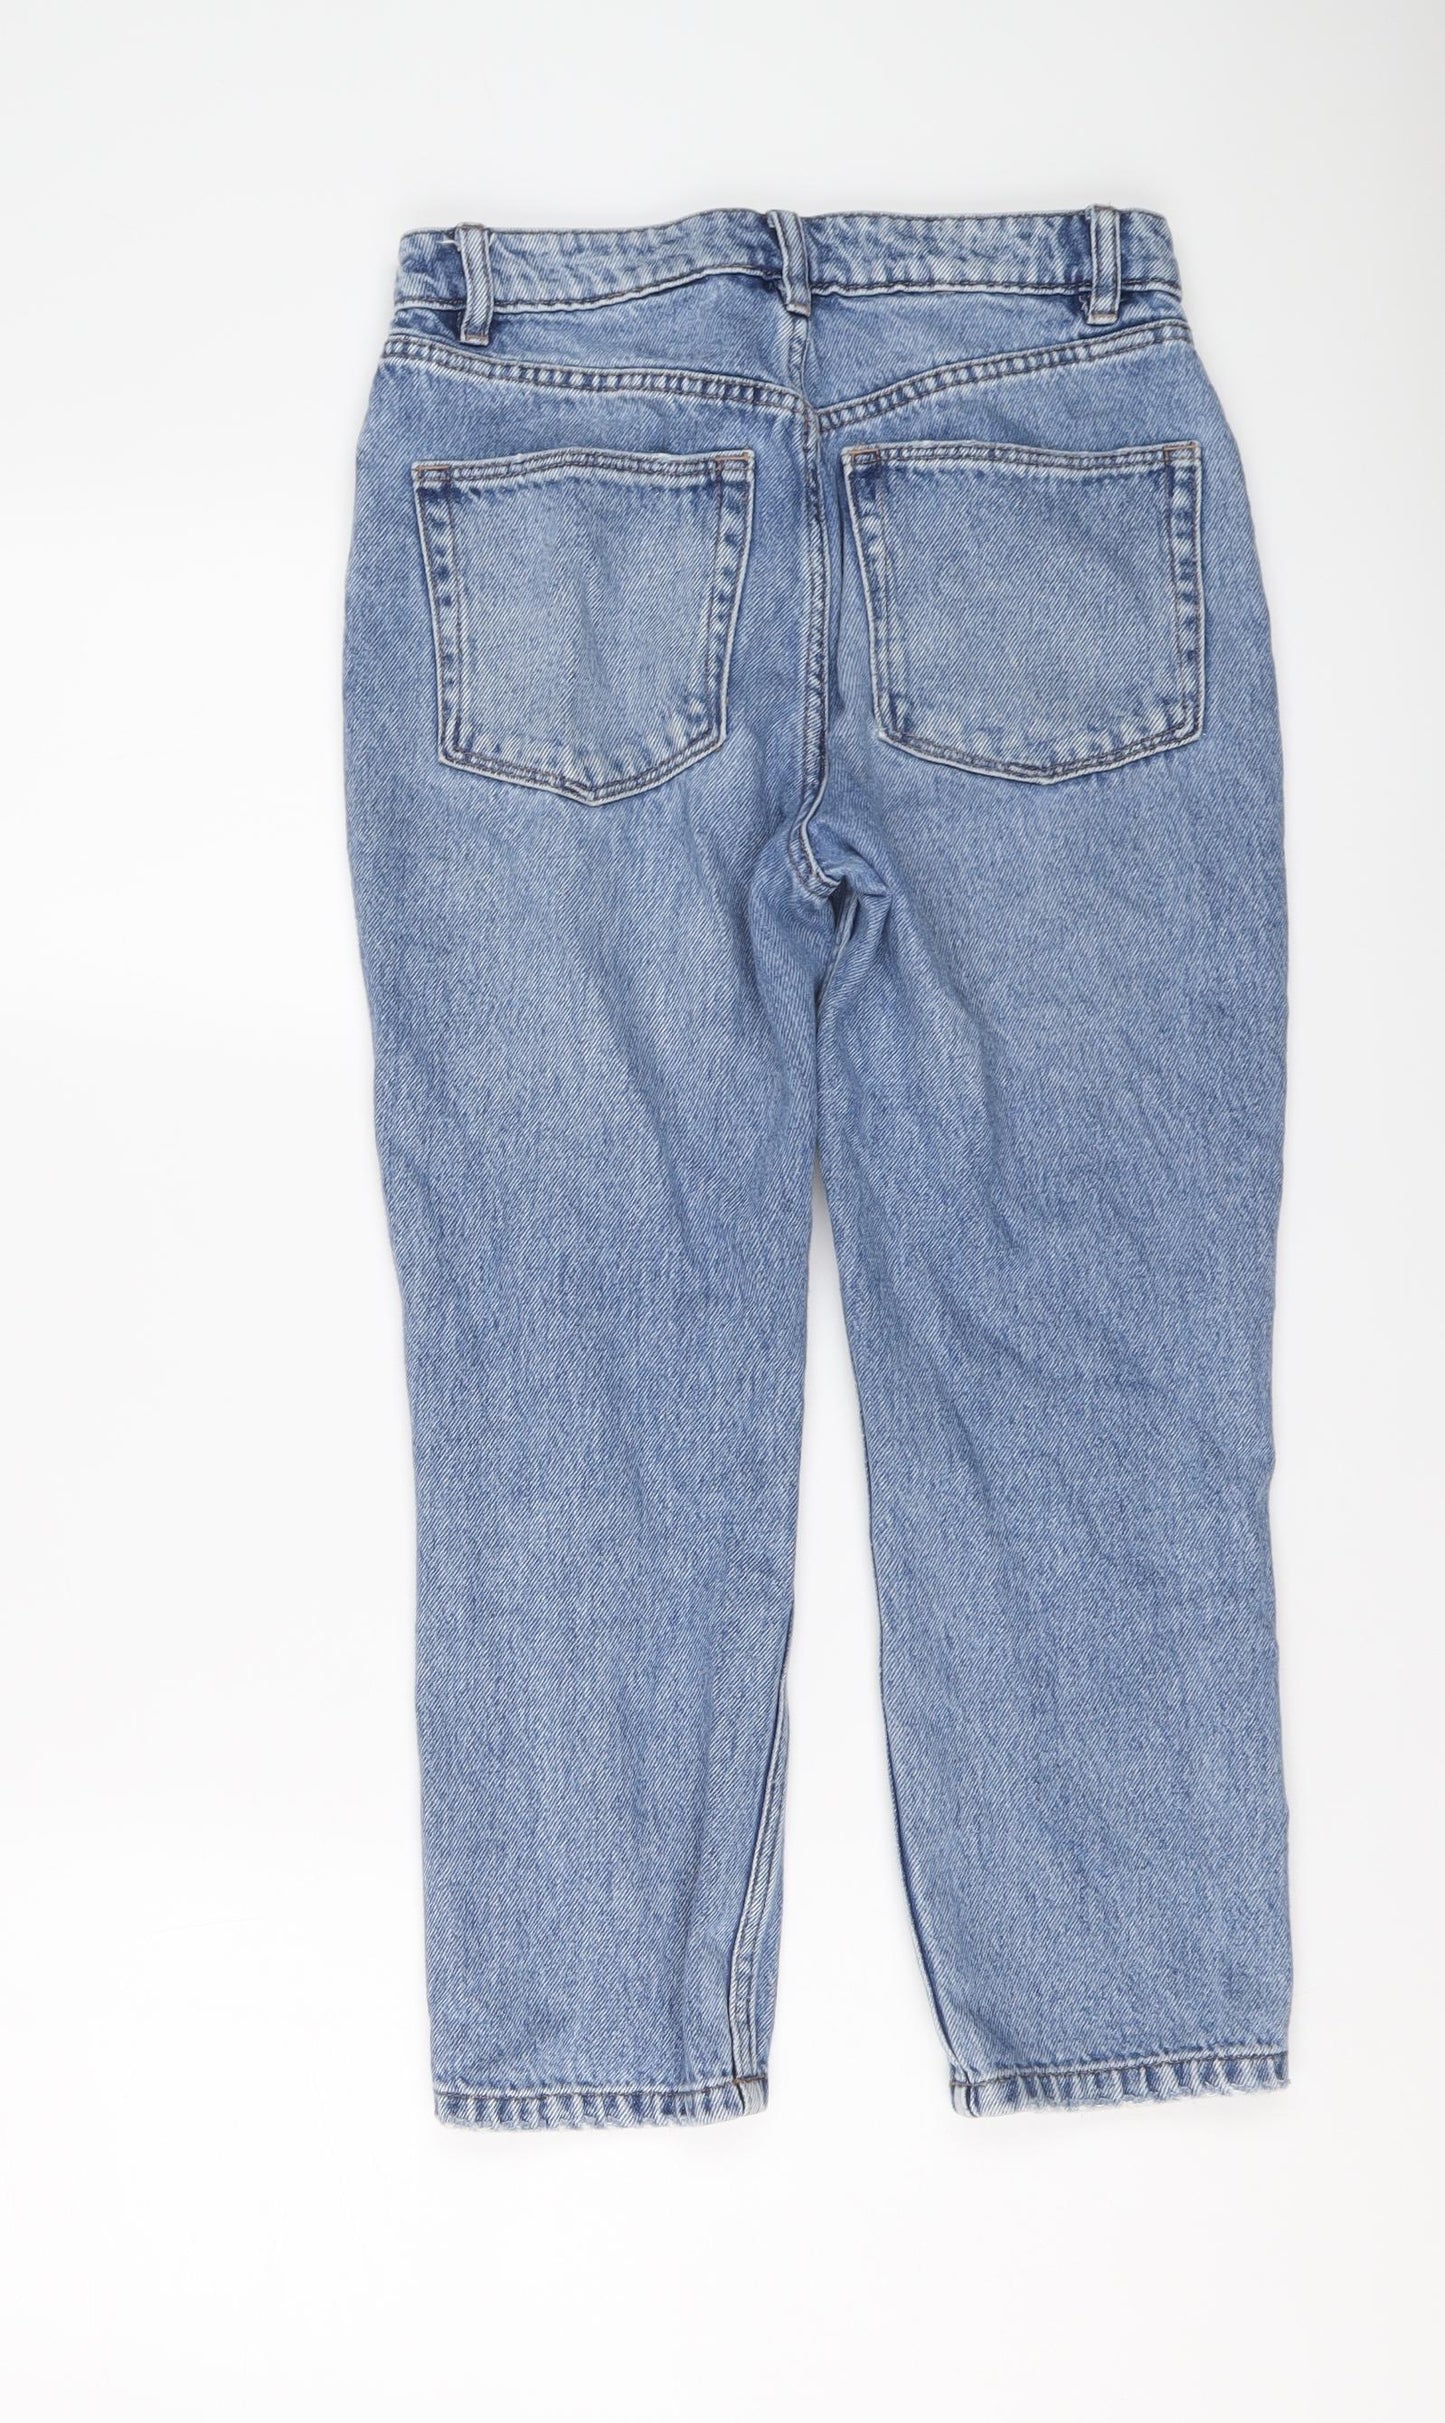 NEXT Womens Blue Cotton Mom Jeans Size 10 L23 in Regular Button